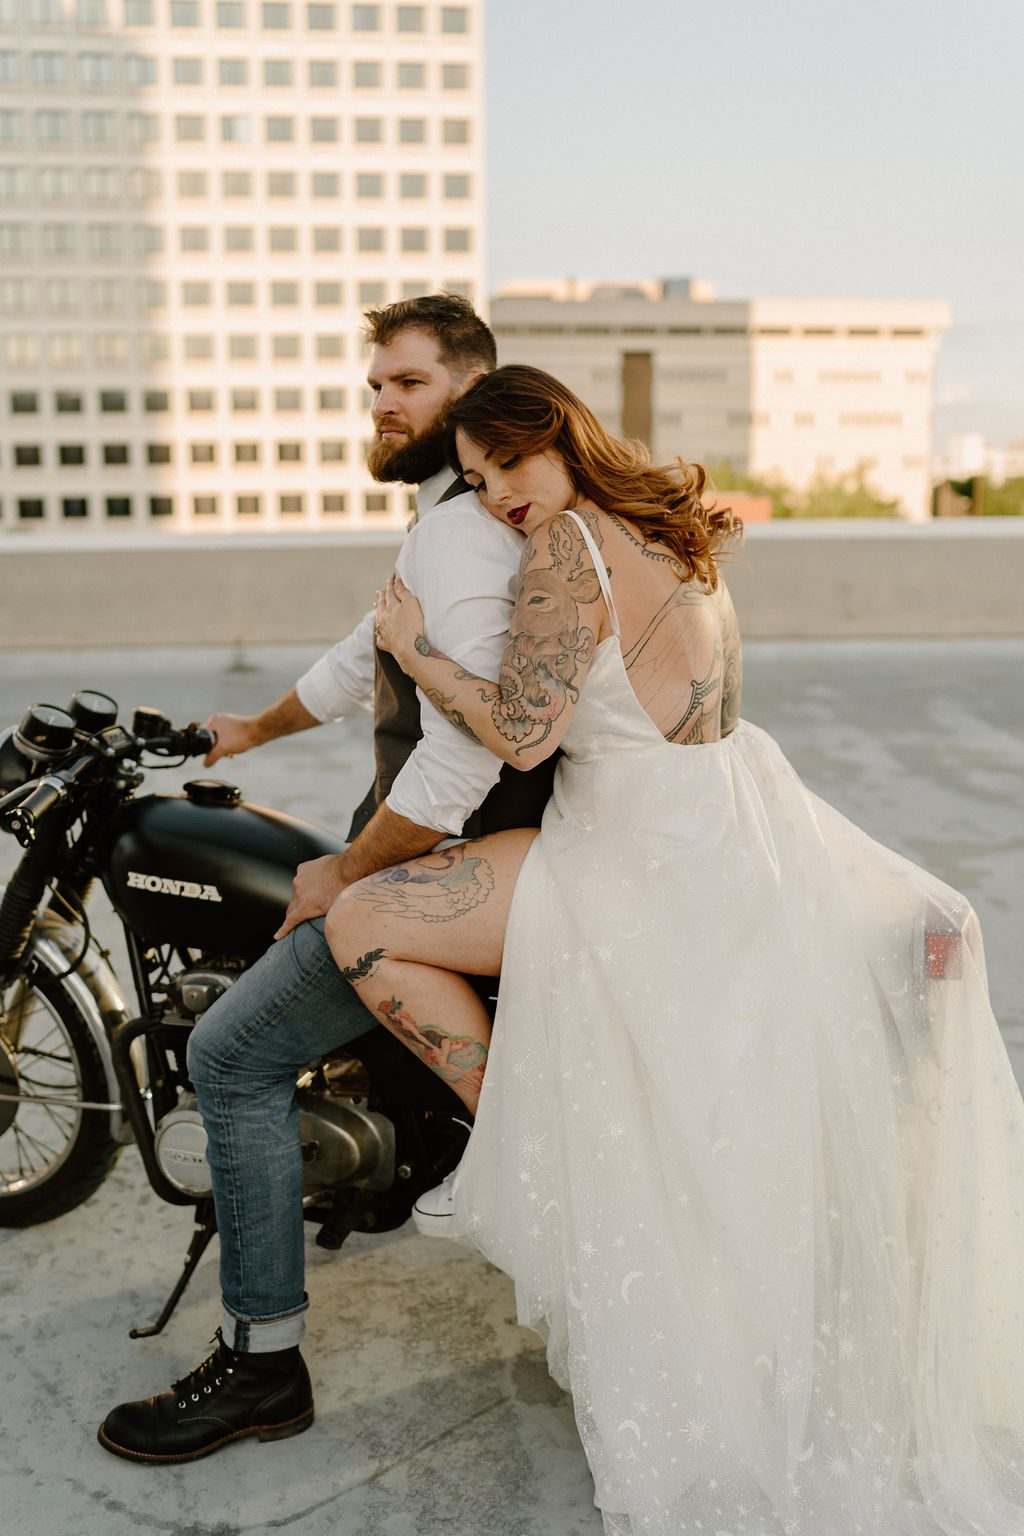 fun urban elopement With Motorcycle